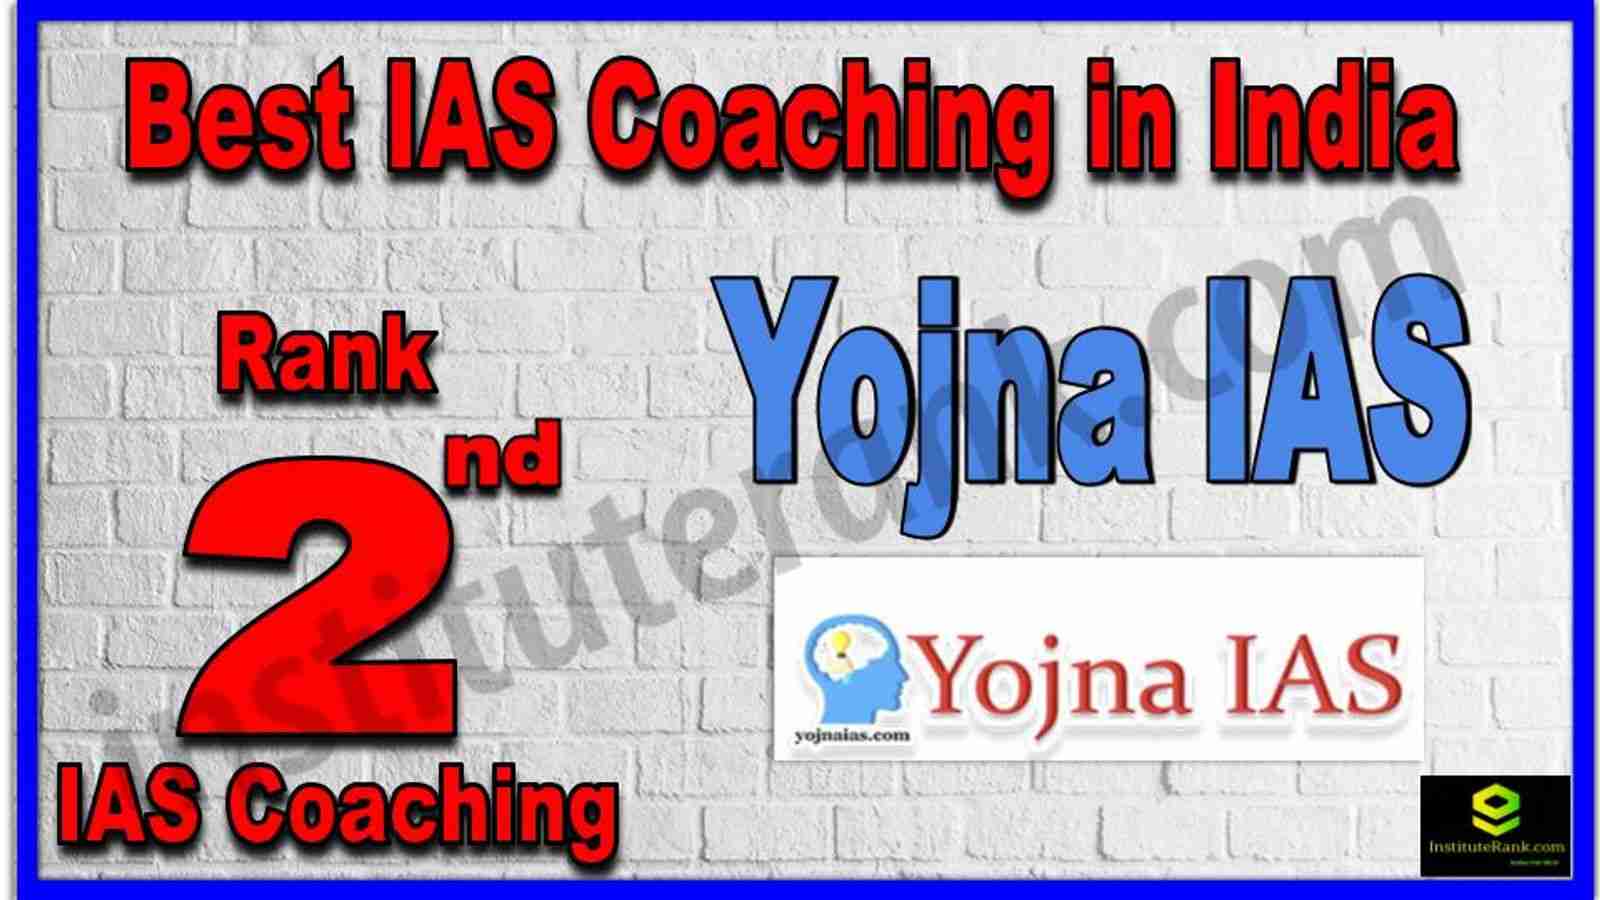 Rank 2nd Best IAS Coaching in India